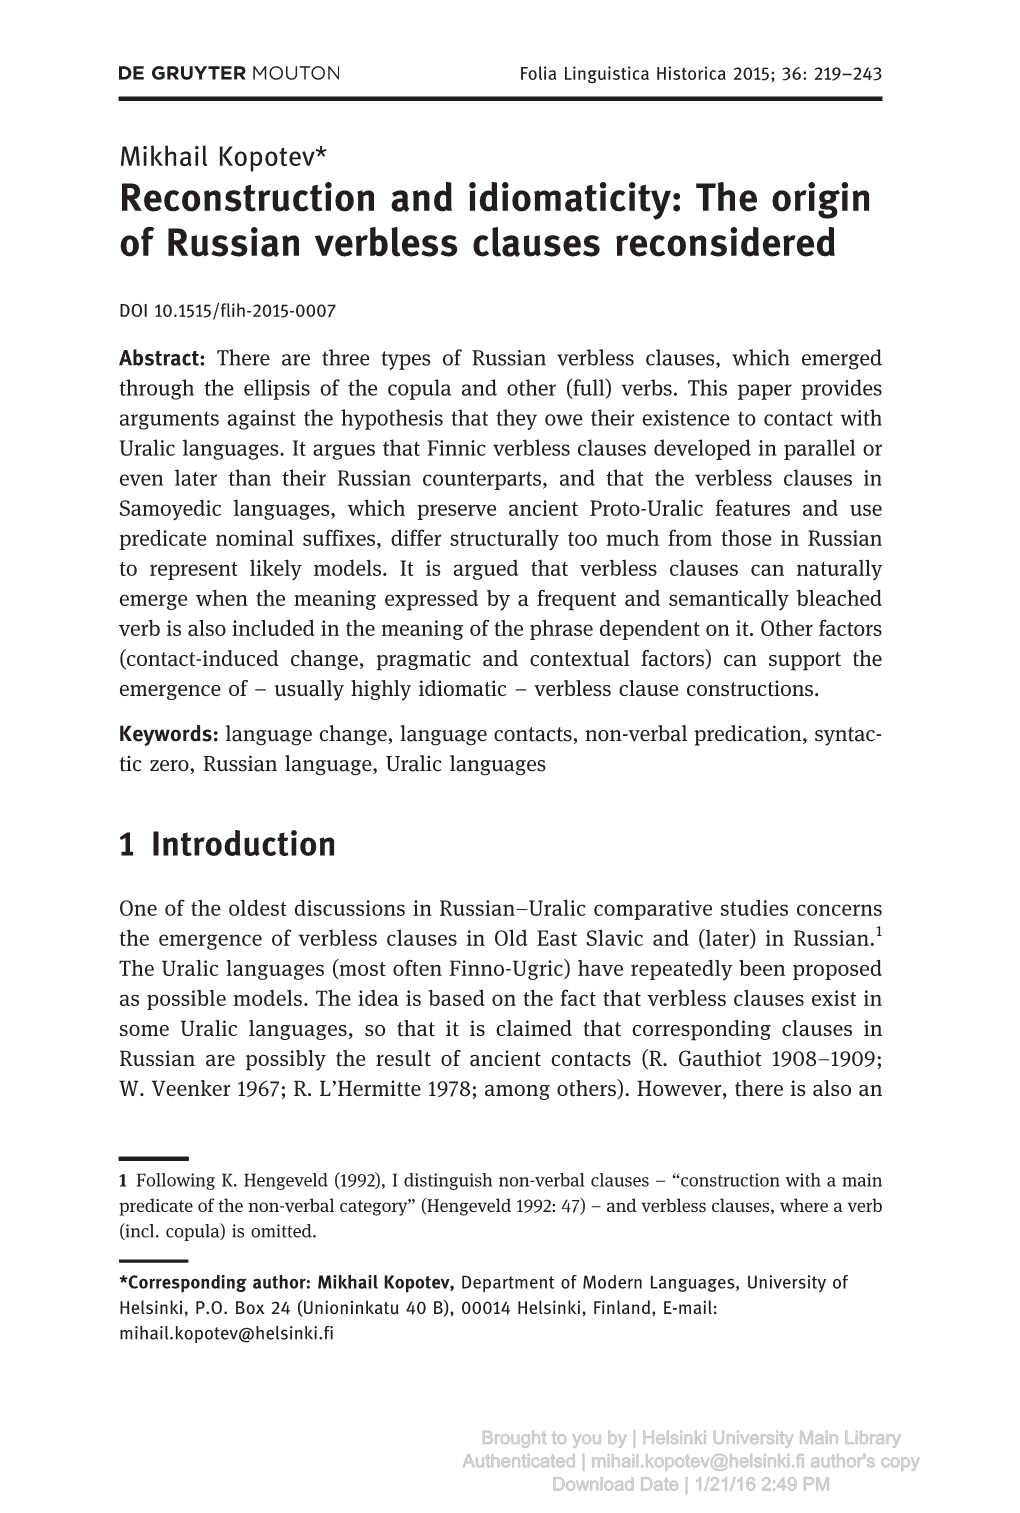 Reconstruction and Idiomaticity: the Origin of Russian Verbless Clauses Reconsidered